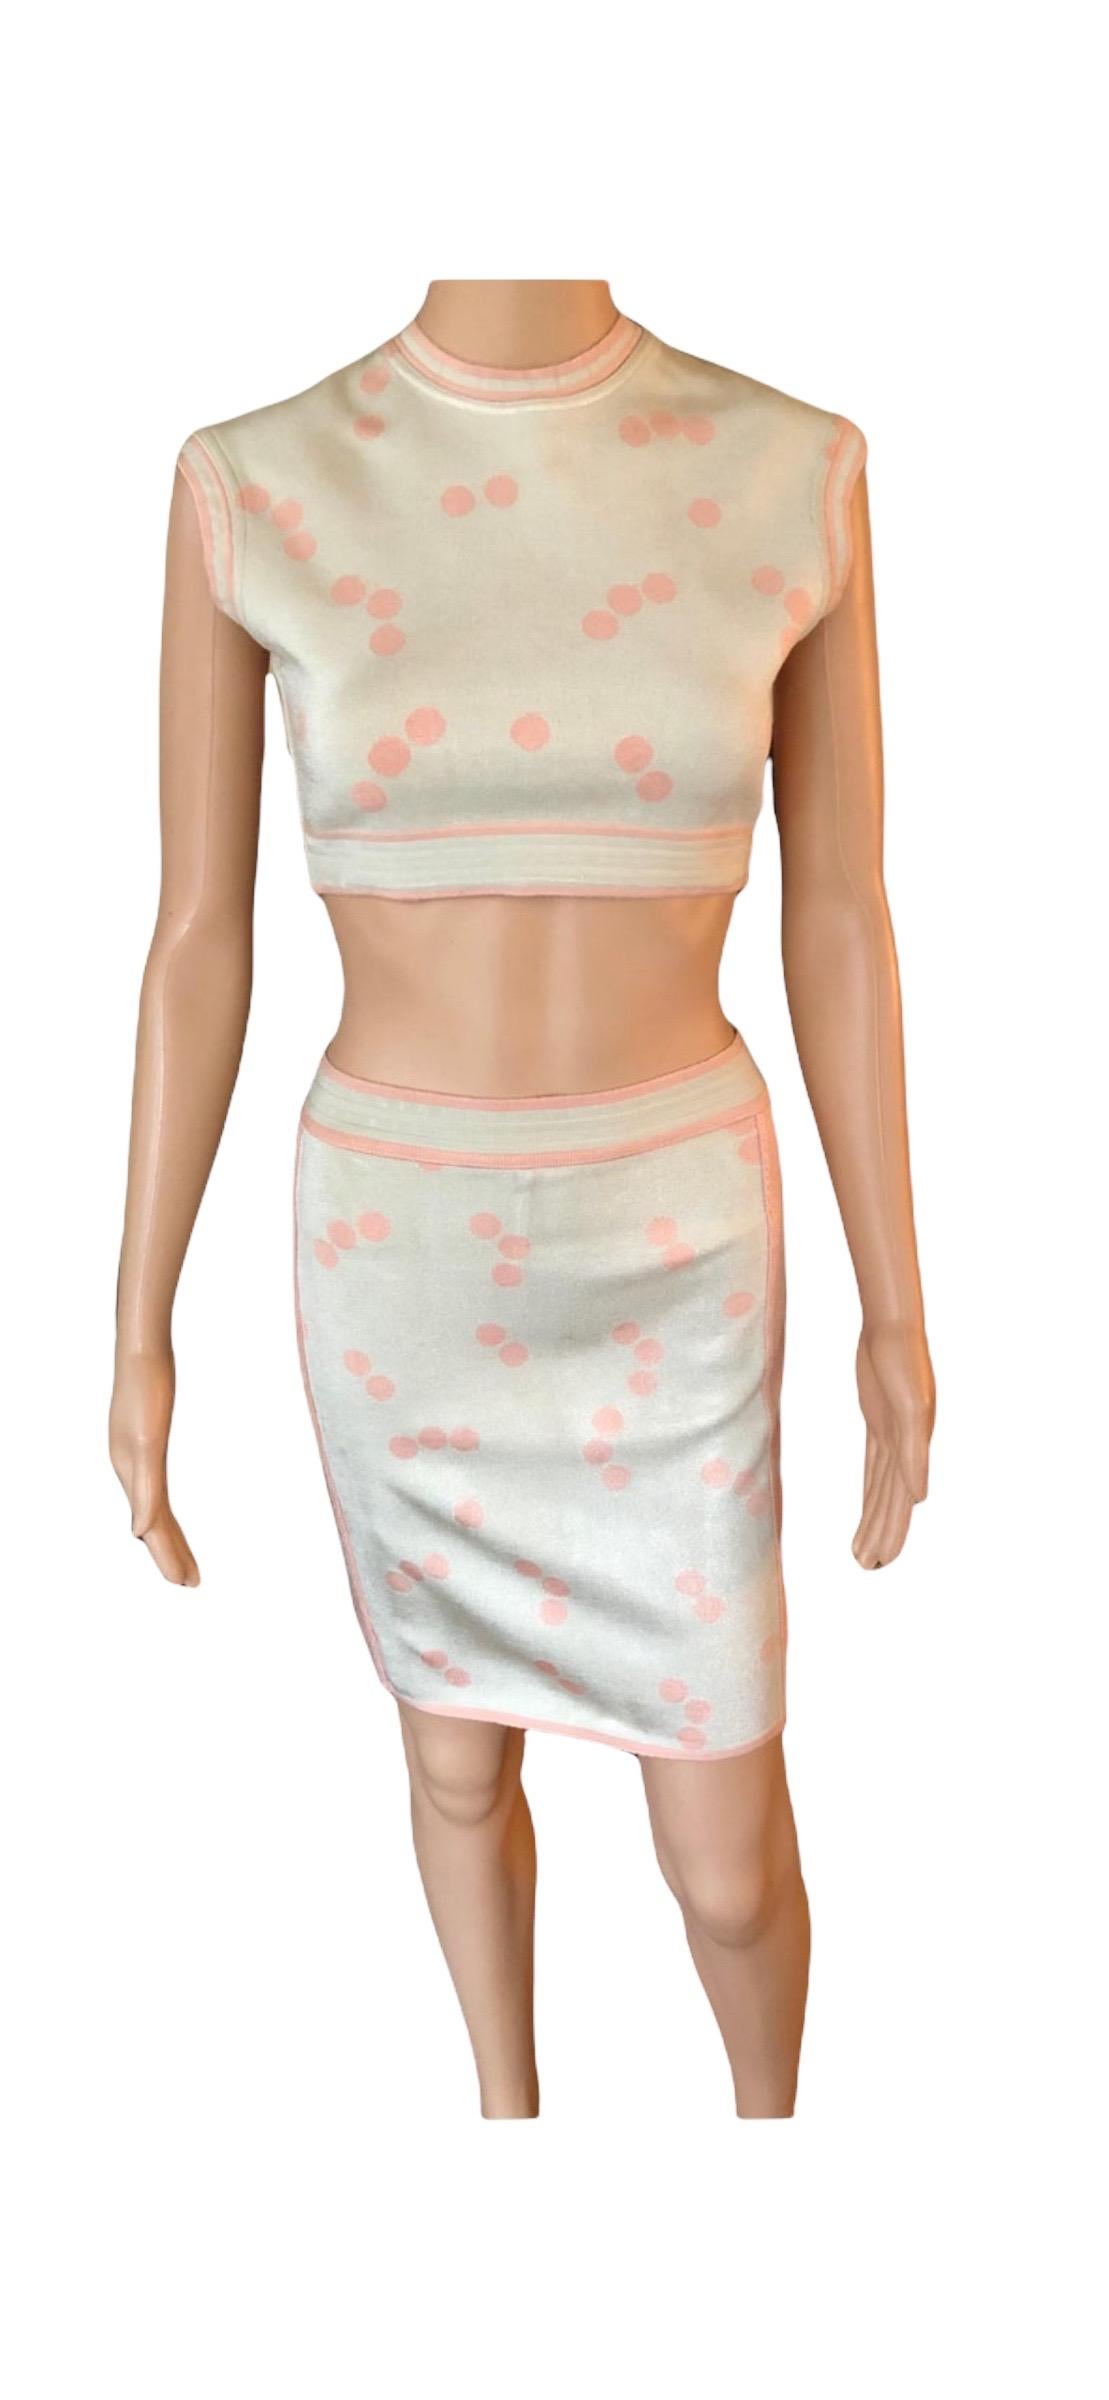 Azzedine Alaia S/S 1991 Vintage Skirt and Crop Top 2 Piece Set  For Sale 3